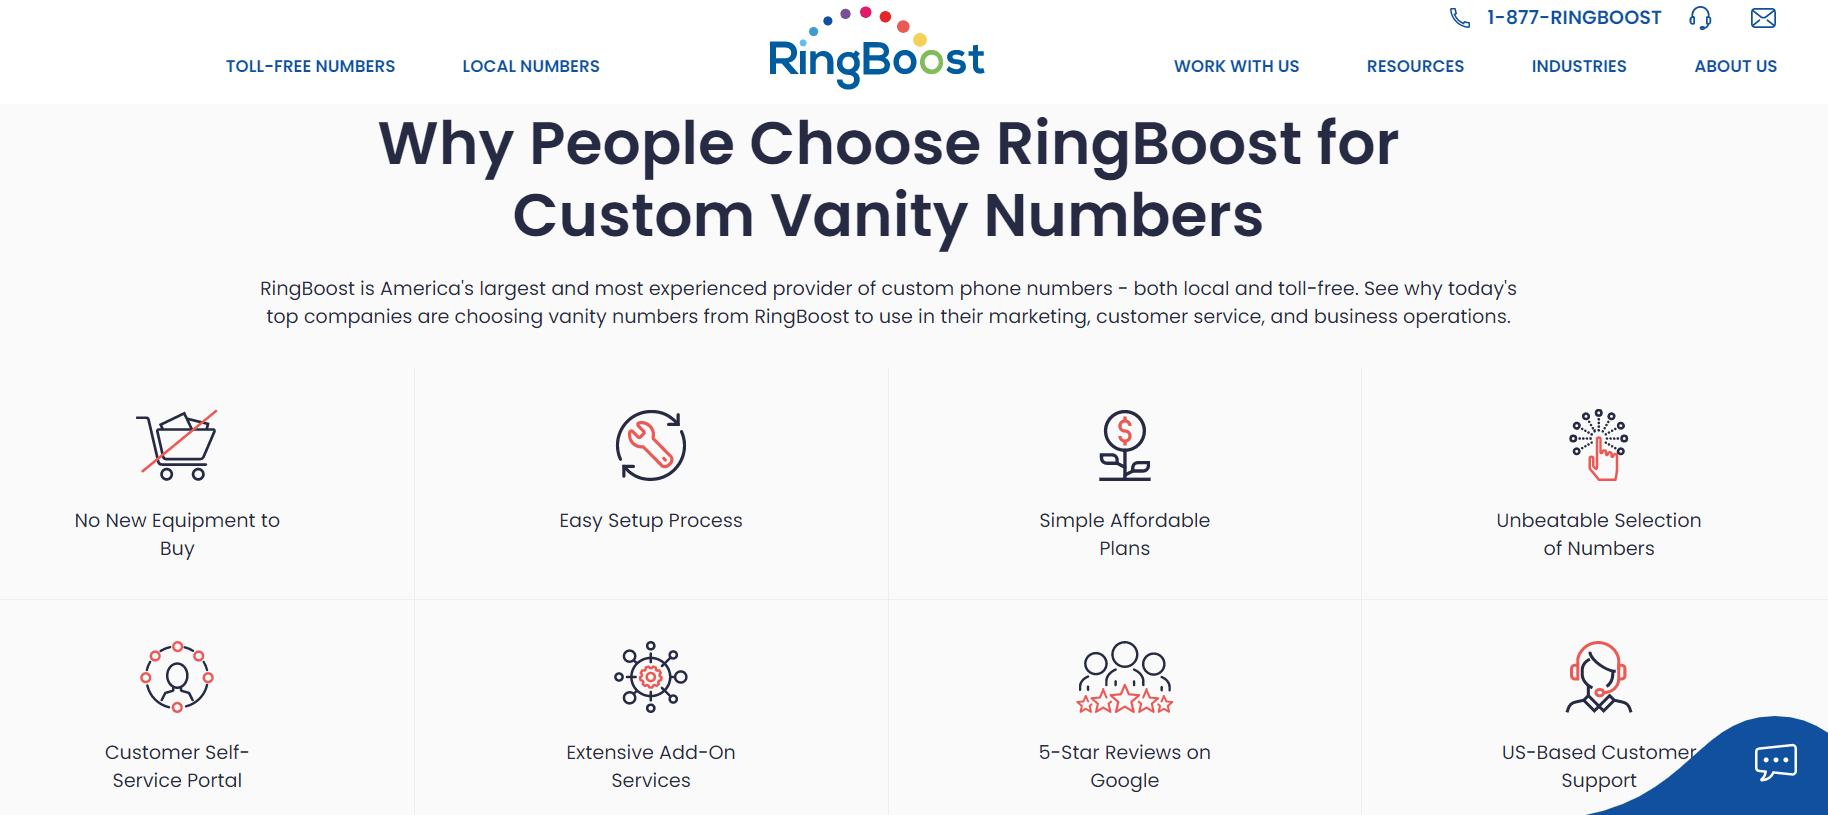 ringboost features